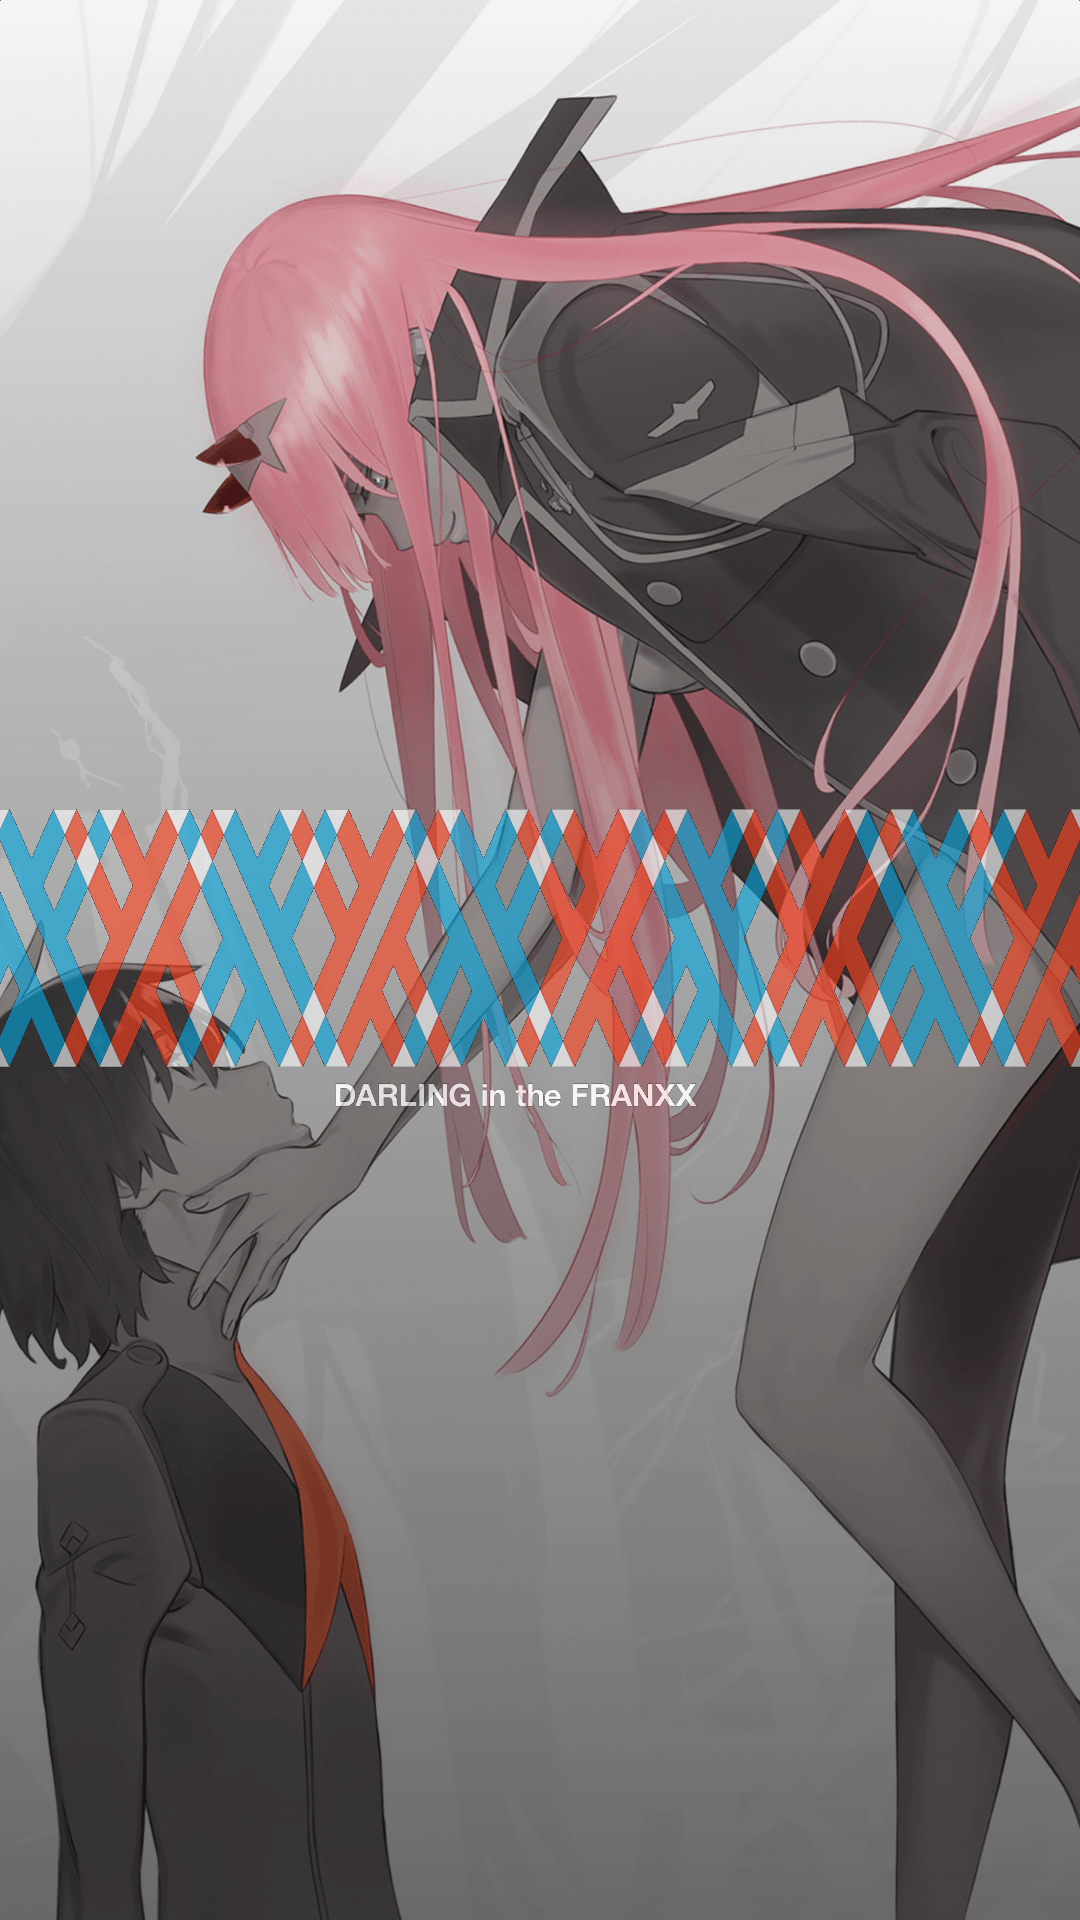 A wallpaper I quickly put together [Darling in the FRANXX] [1080X1920]. Darling in the franxx, Anime wallpaper iphone, Anime wallpaper